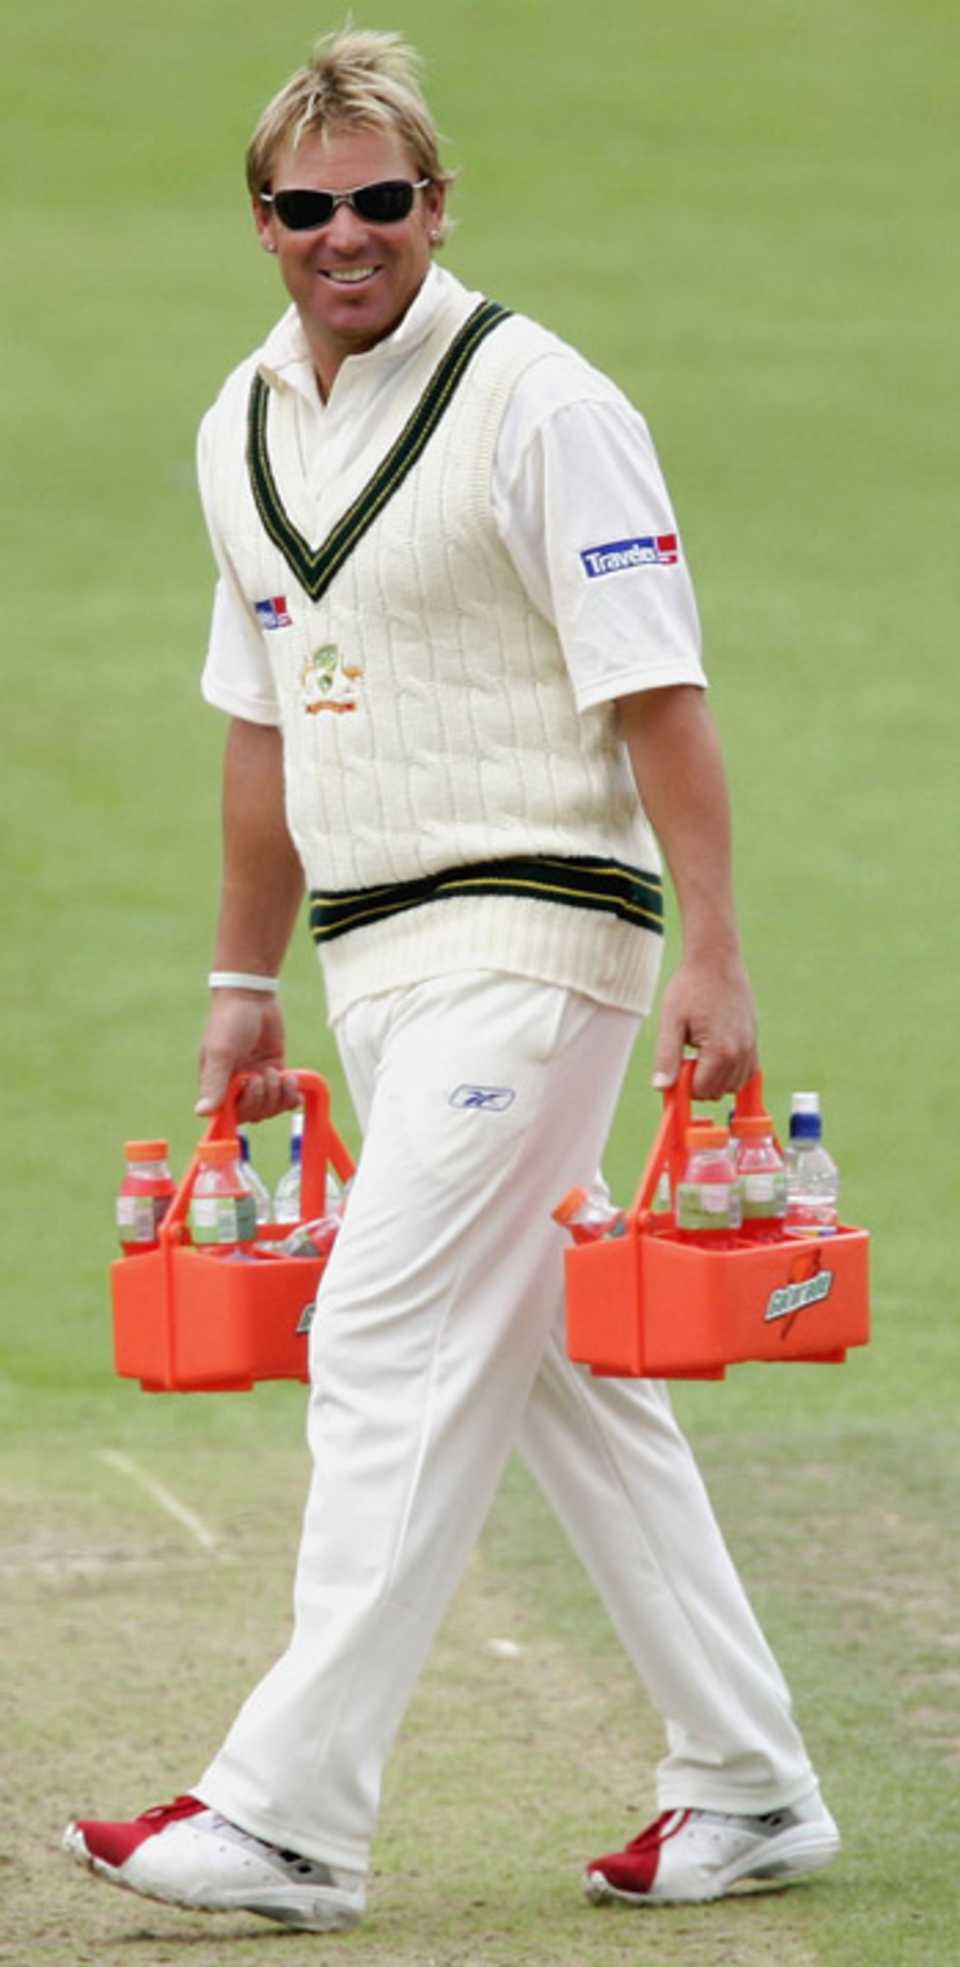 Shane Warne is relegated to drinks-carrying duties, Australia v Worcestershire, Worcester, August 1, 2005